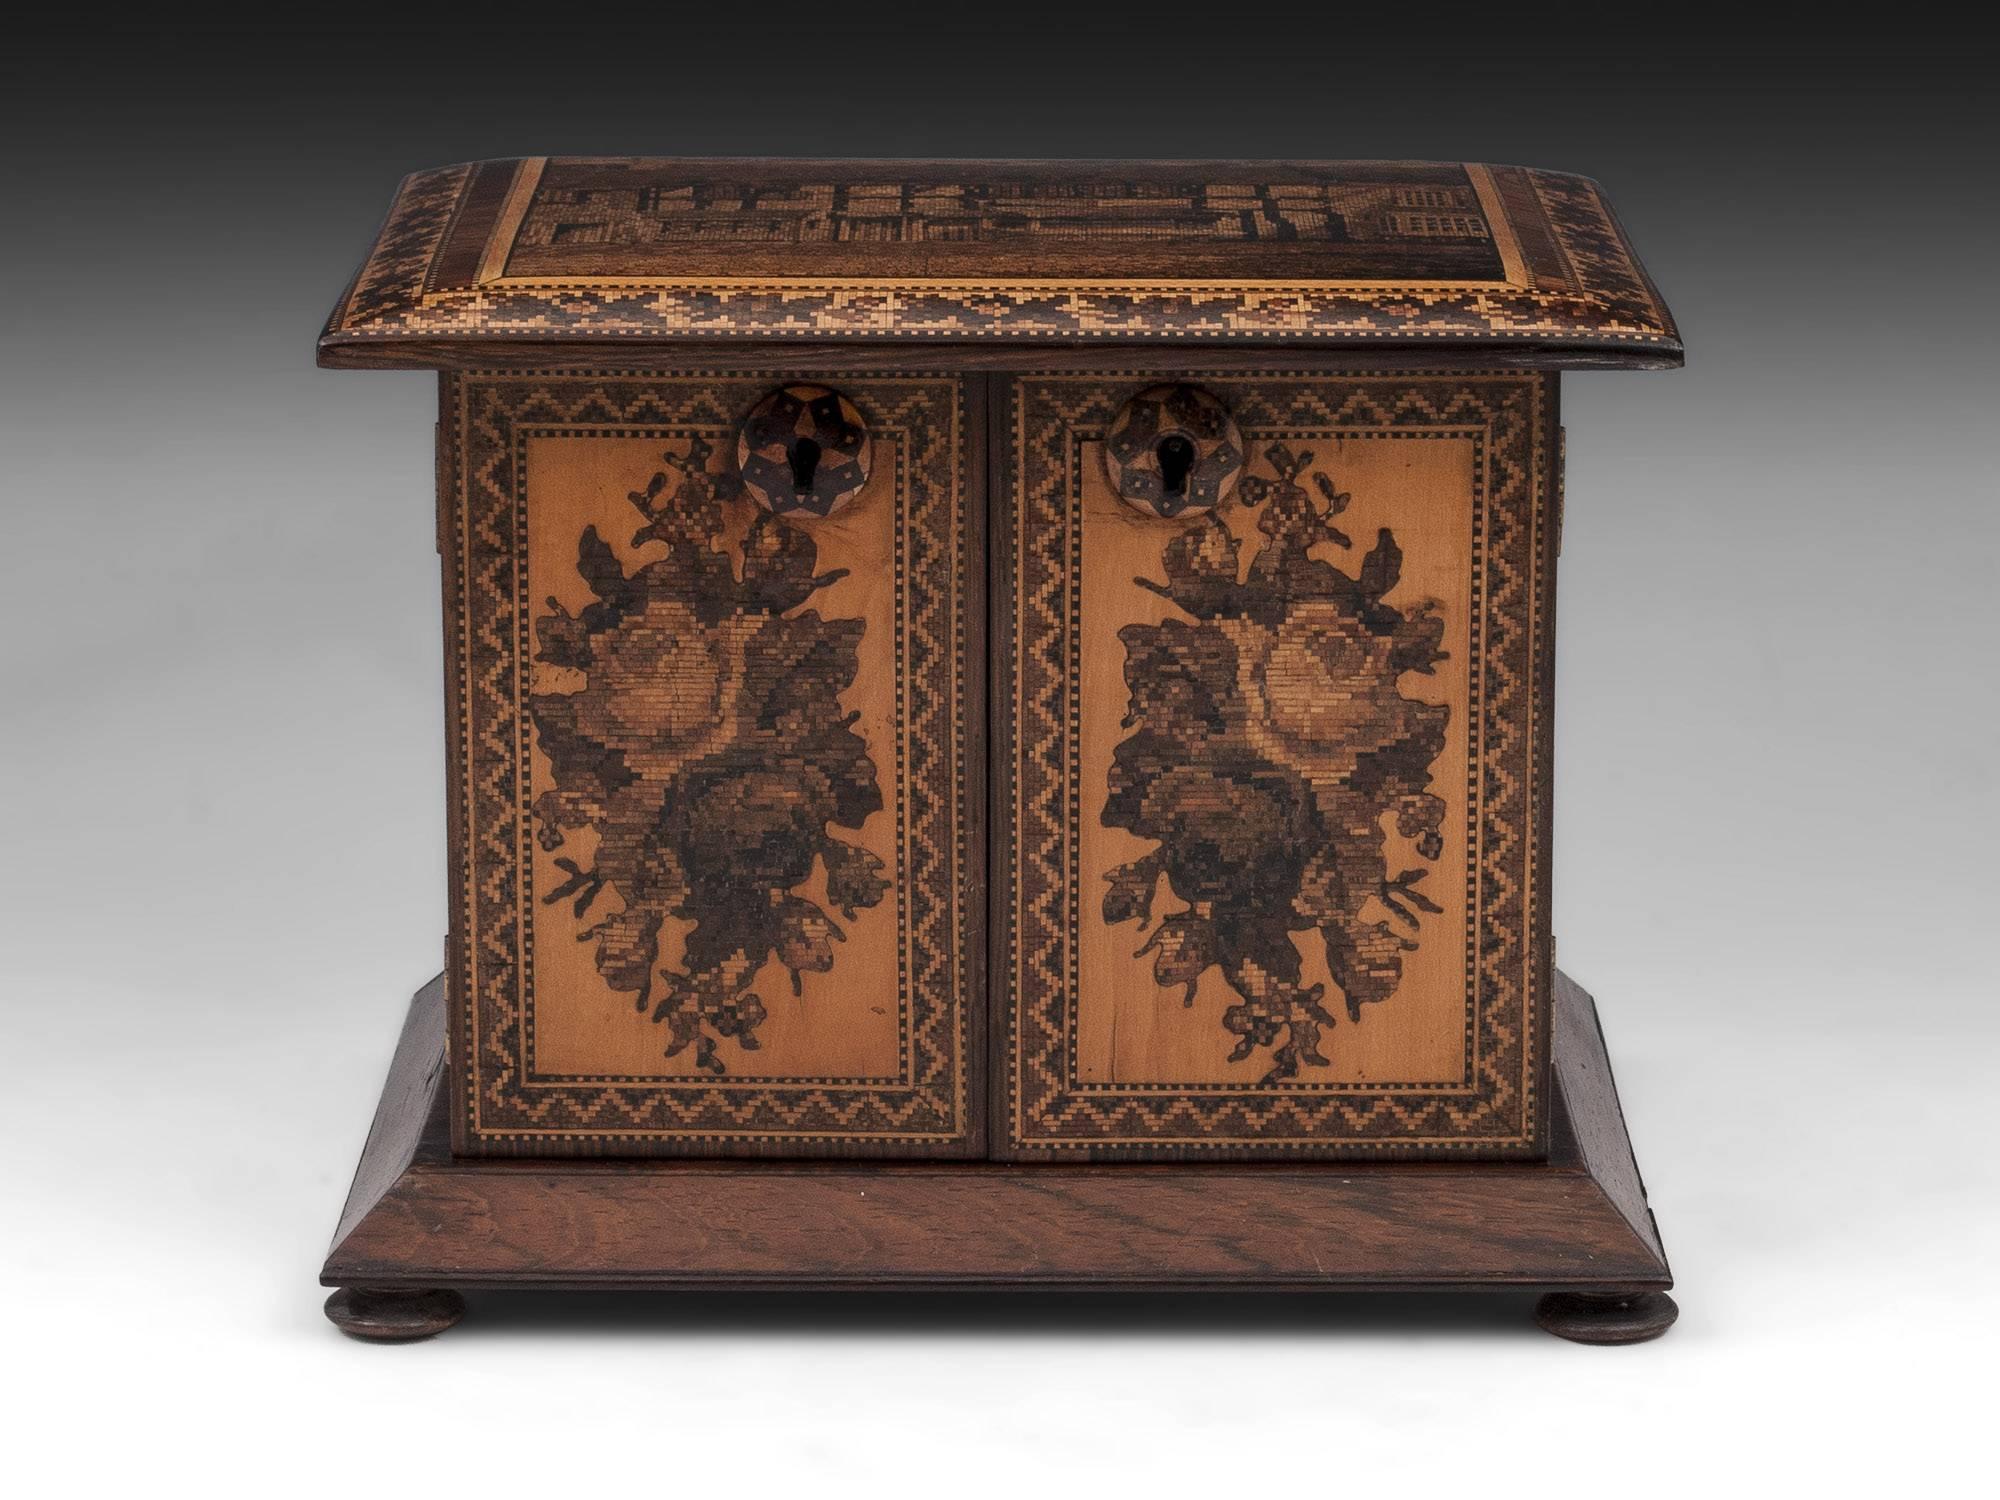 Tunbridge ware table cabinet veneered in Mahogany with floral inlays on the doors, a plinth base standing on four turned wooden feet. The top has a view of Shakespeare's birthplace. 

The interior of the tunbridge ware cabinet features four drawers